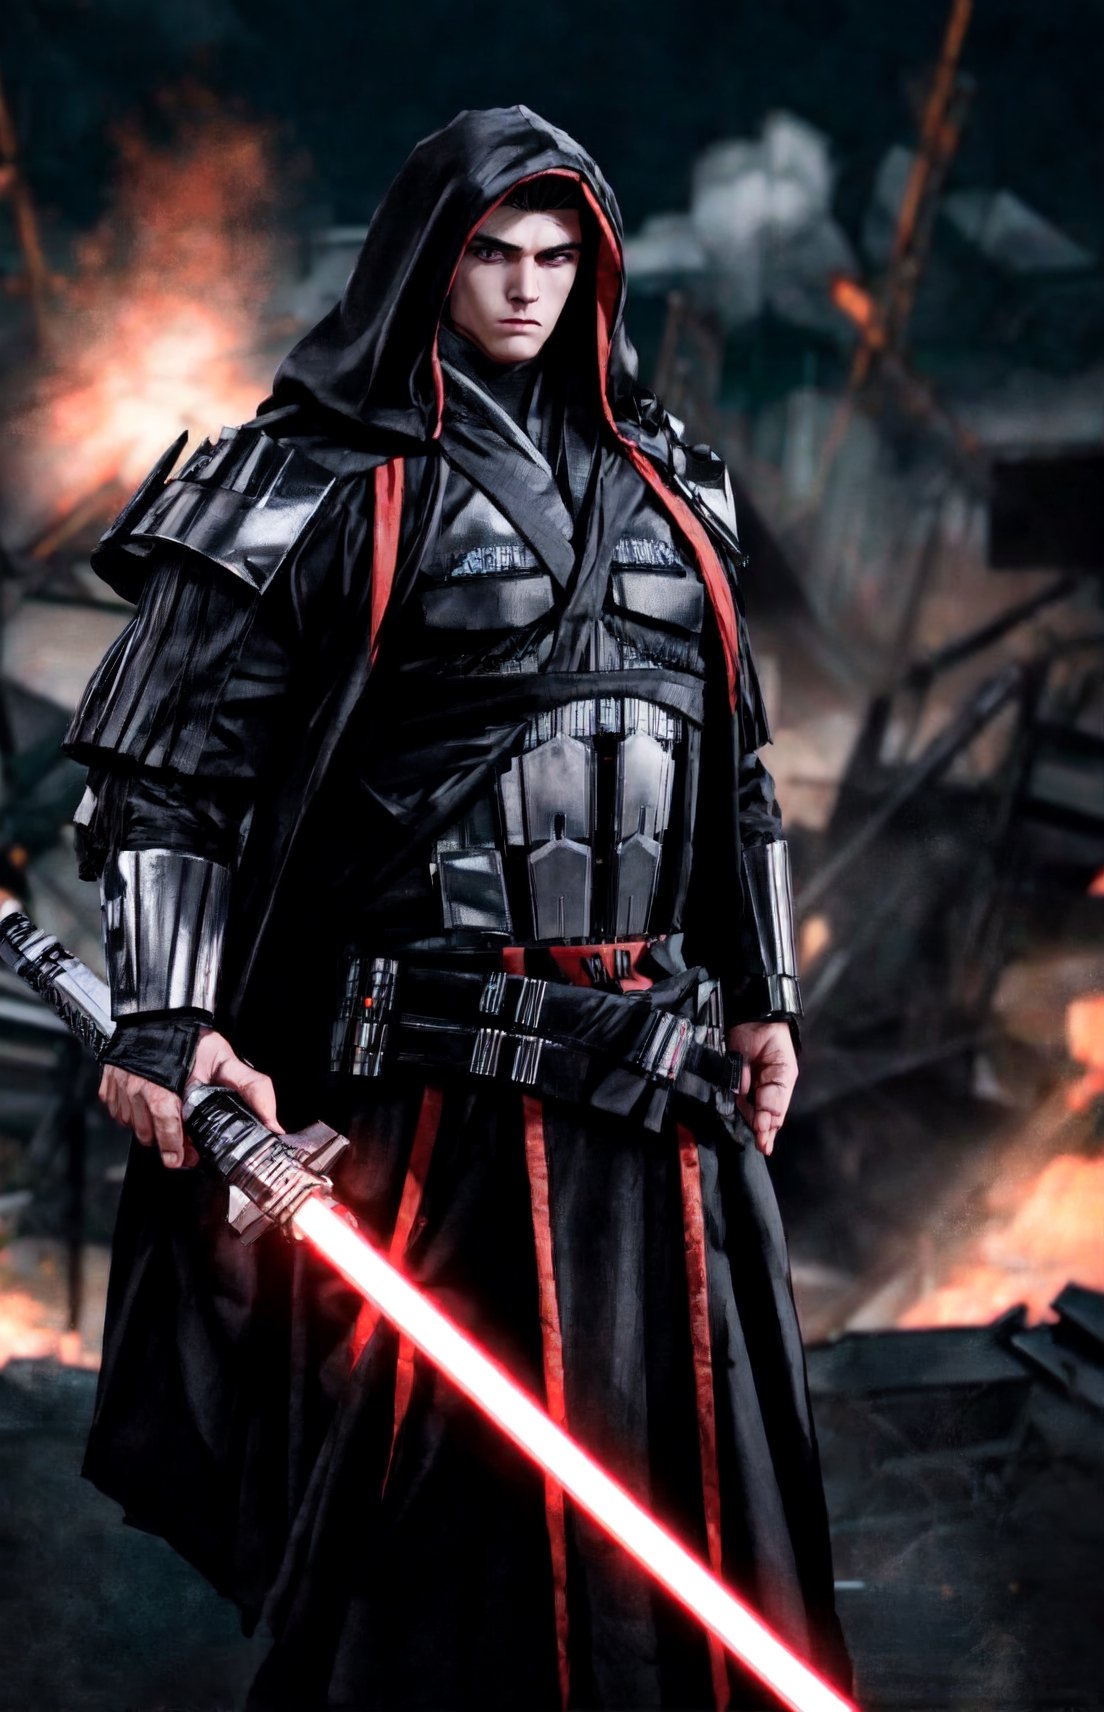 Large man in Sith gear holding a black lightsaber, destruction,complex_background,muscular_body.,b33rb3lly,perfecteyes eyes